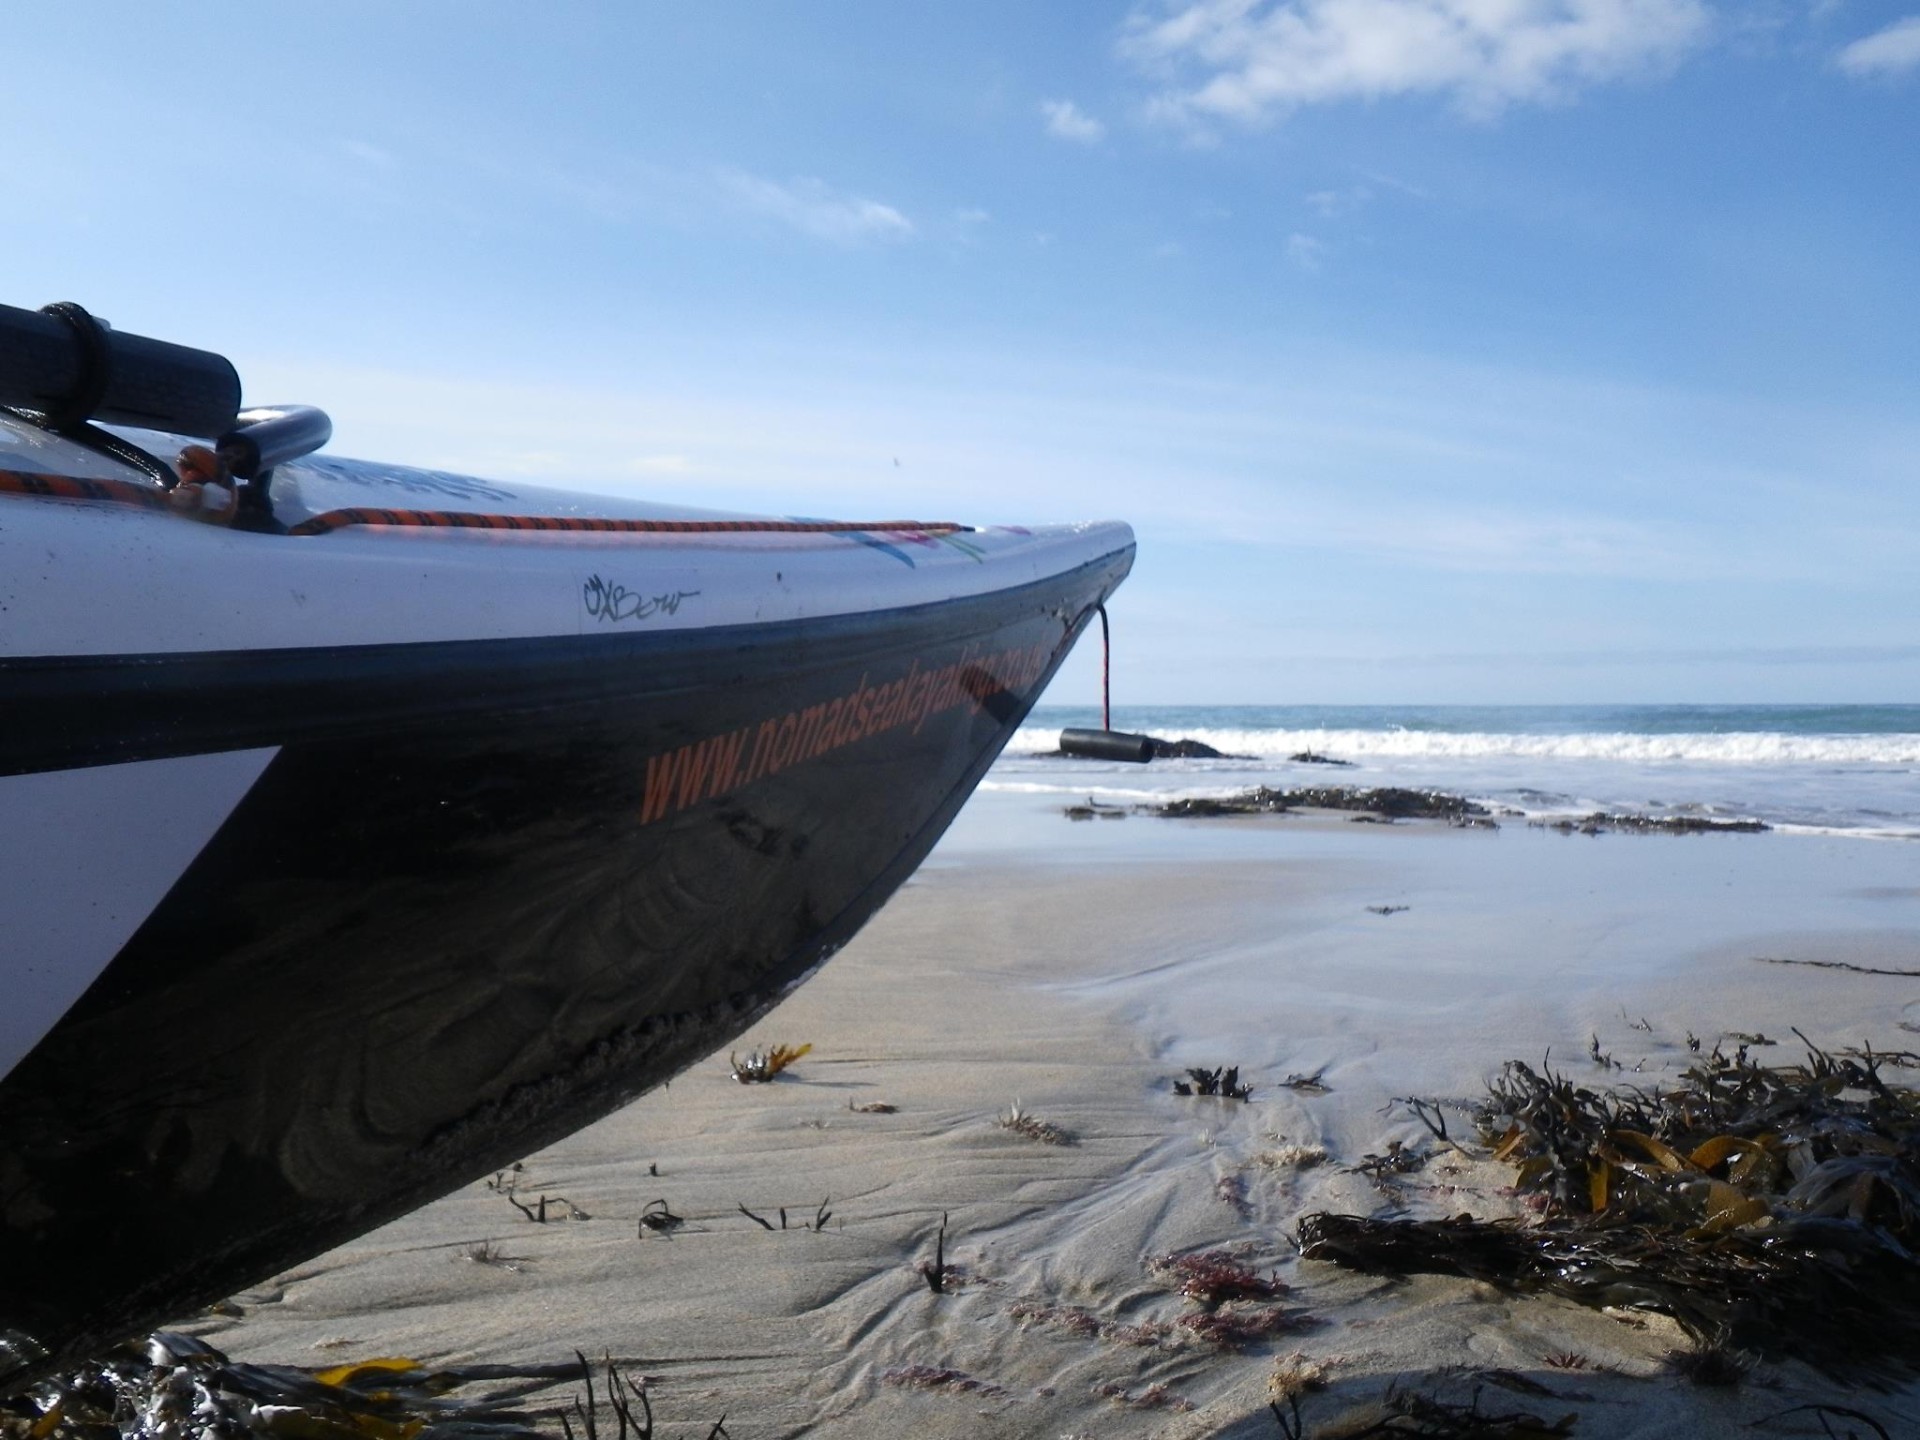 Nose of a sea kayak on a sandy beach in Cornwall.